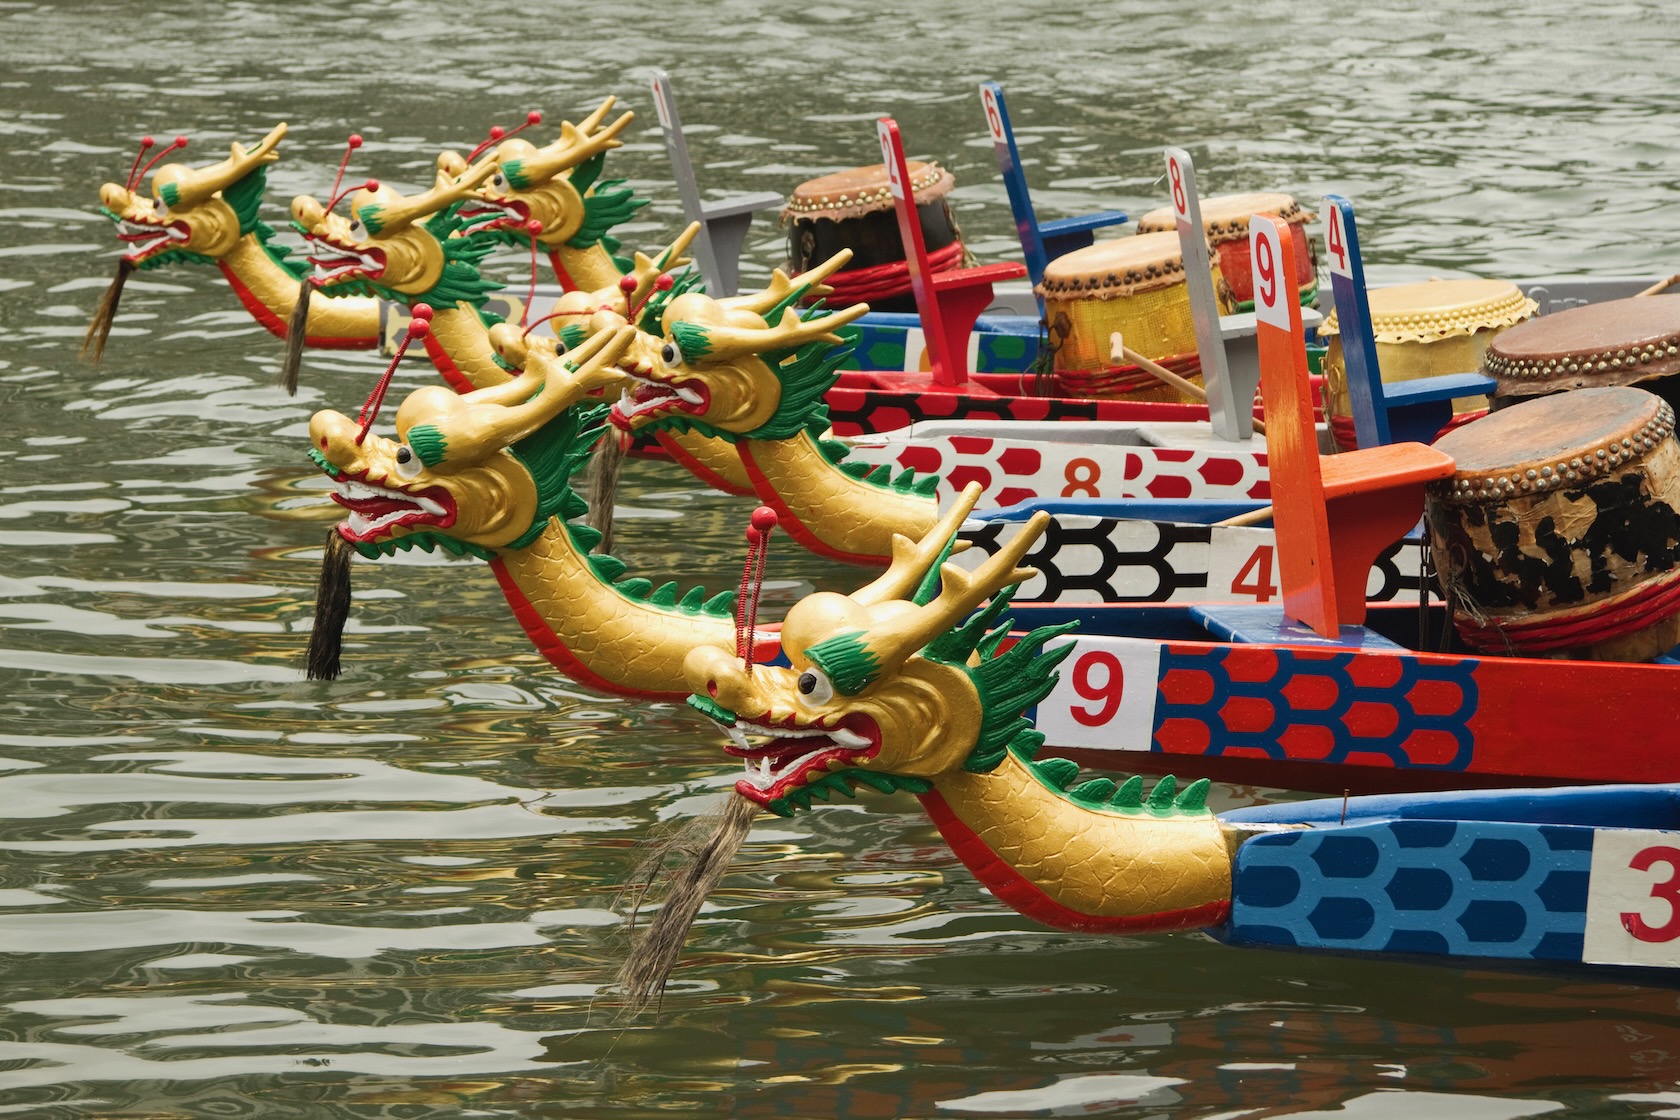 A dragon boat (also dragonboat) is a human-powered boat (Paddled Water Craft) traditionally made of teak wood to various designs and sizes. dragon boats are generally rigged with decorative Chinese dragon heads and tails.